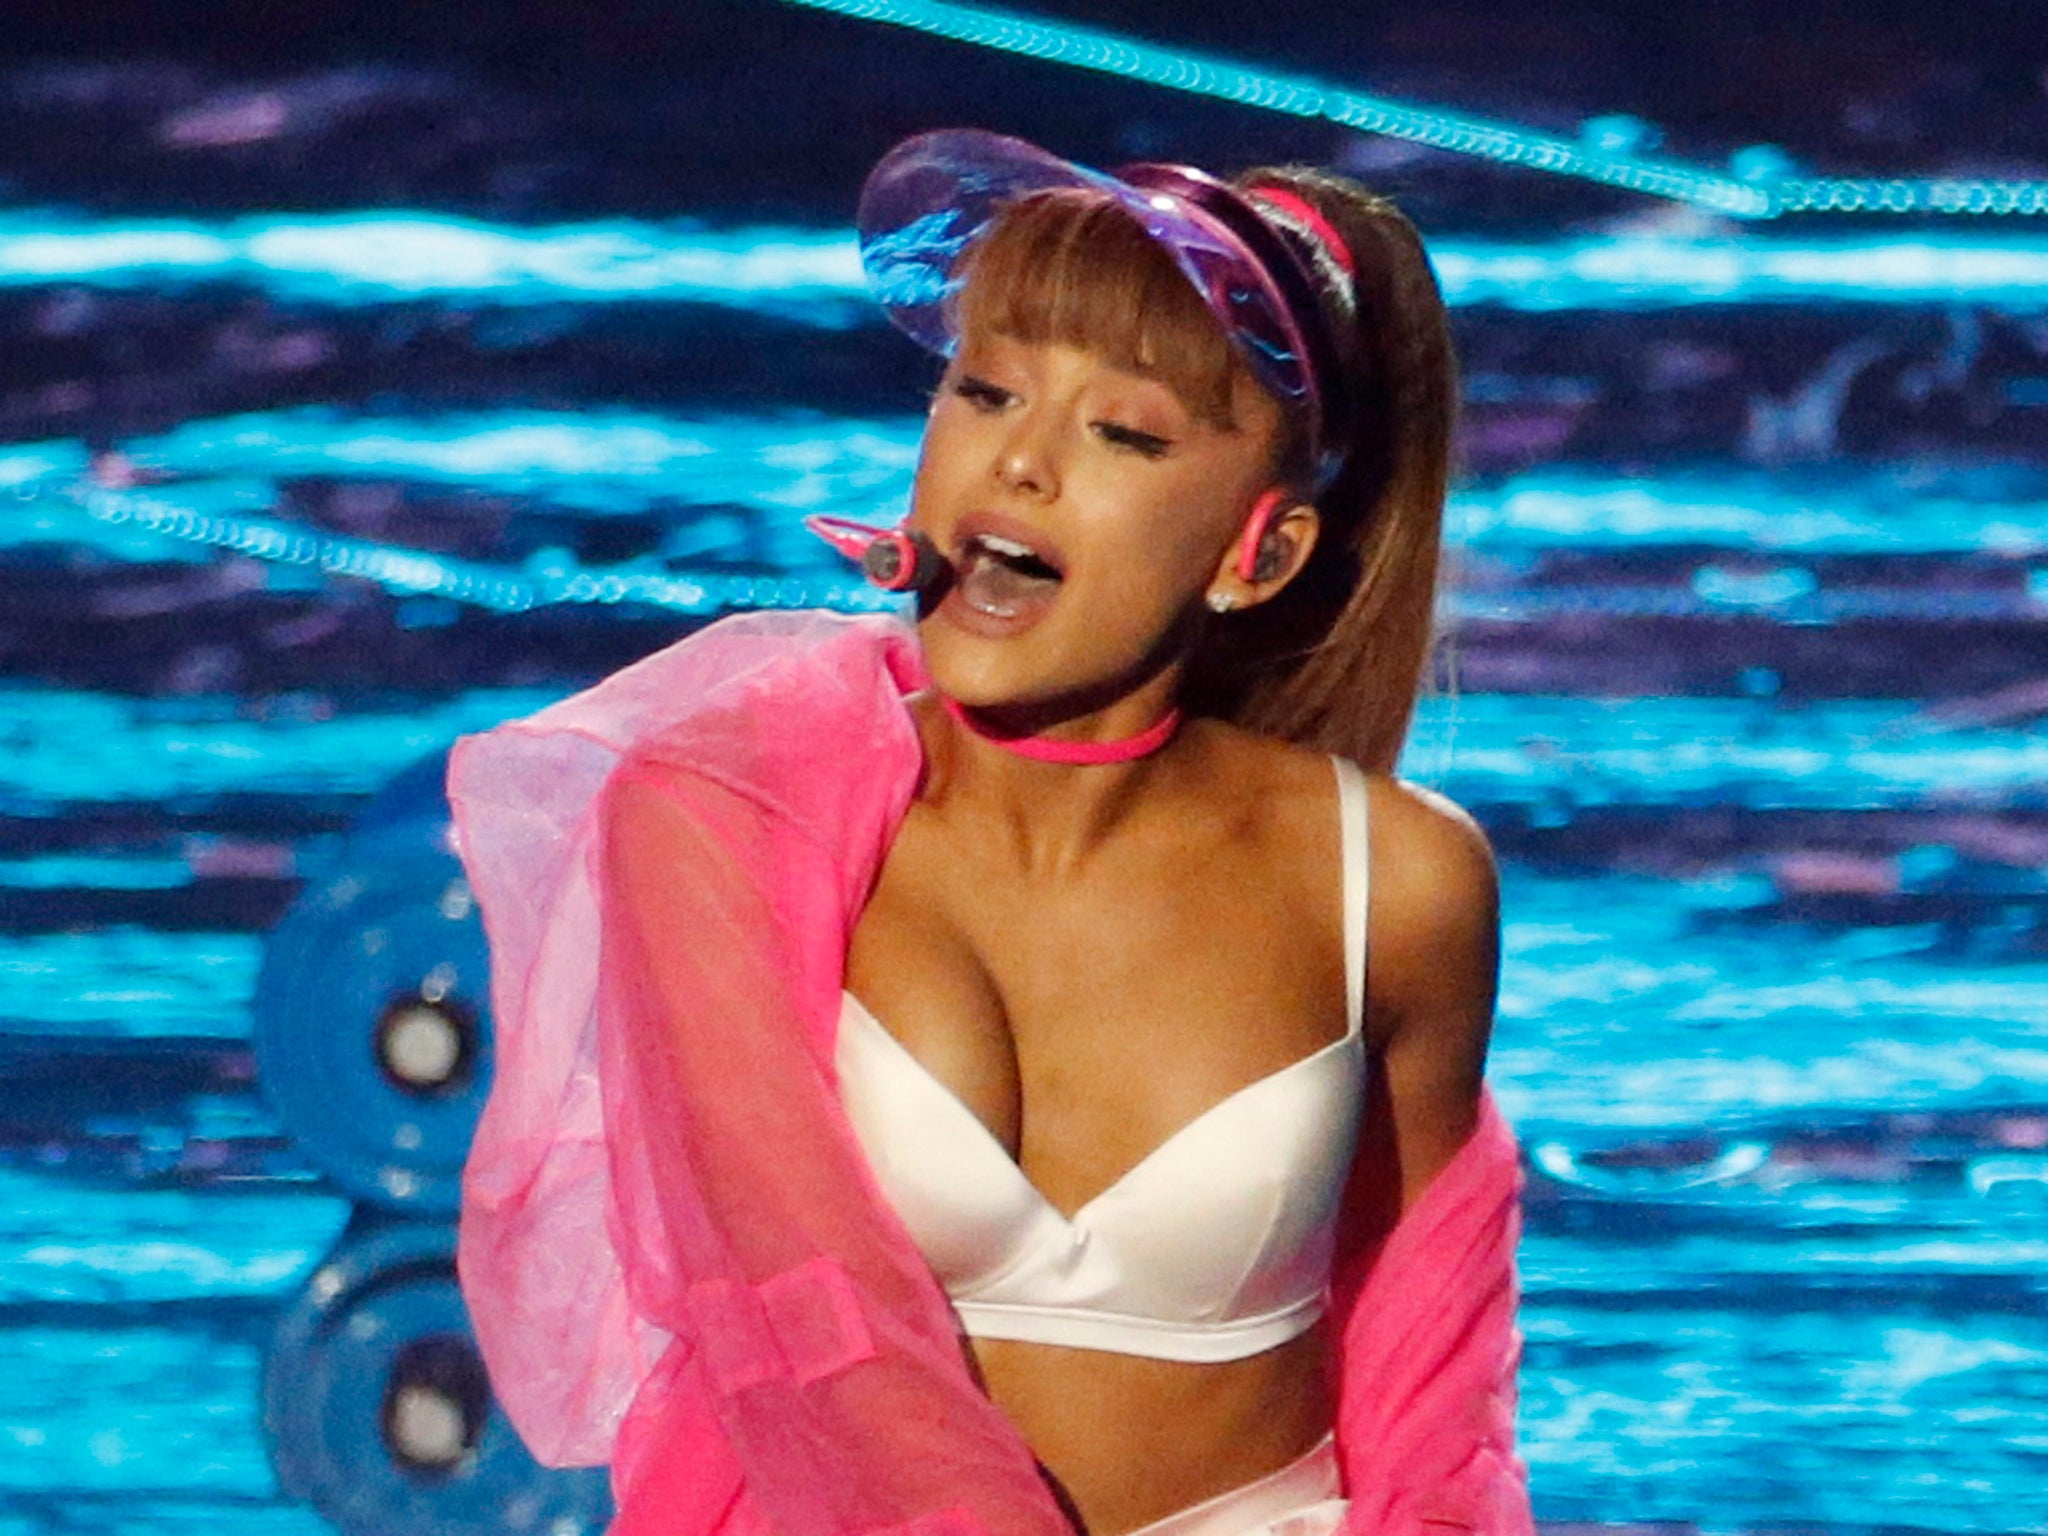 Ariana Grande performs during the 2016 MTV Video Music Awards